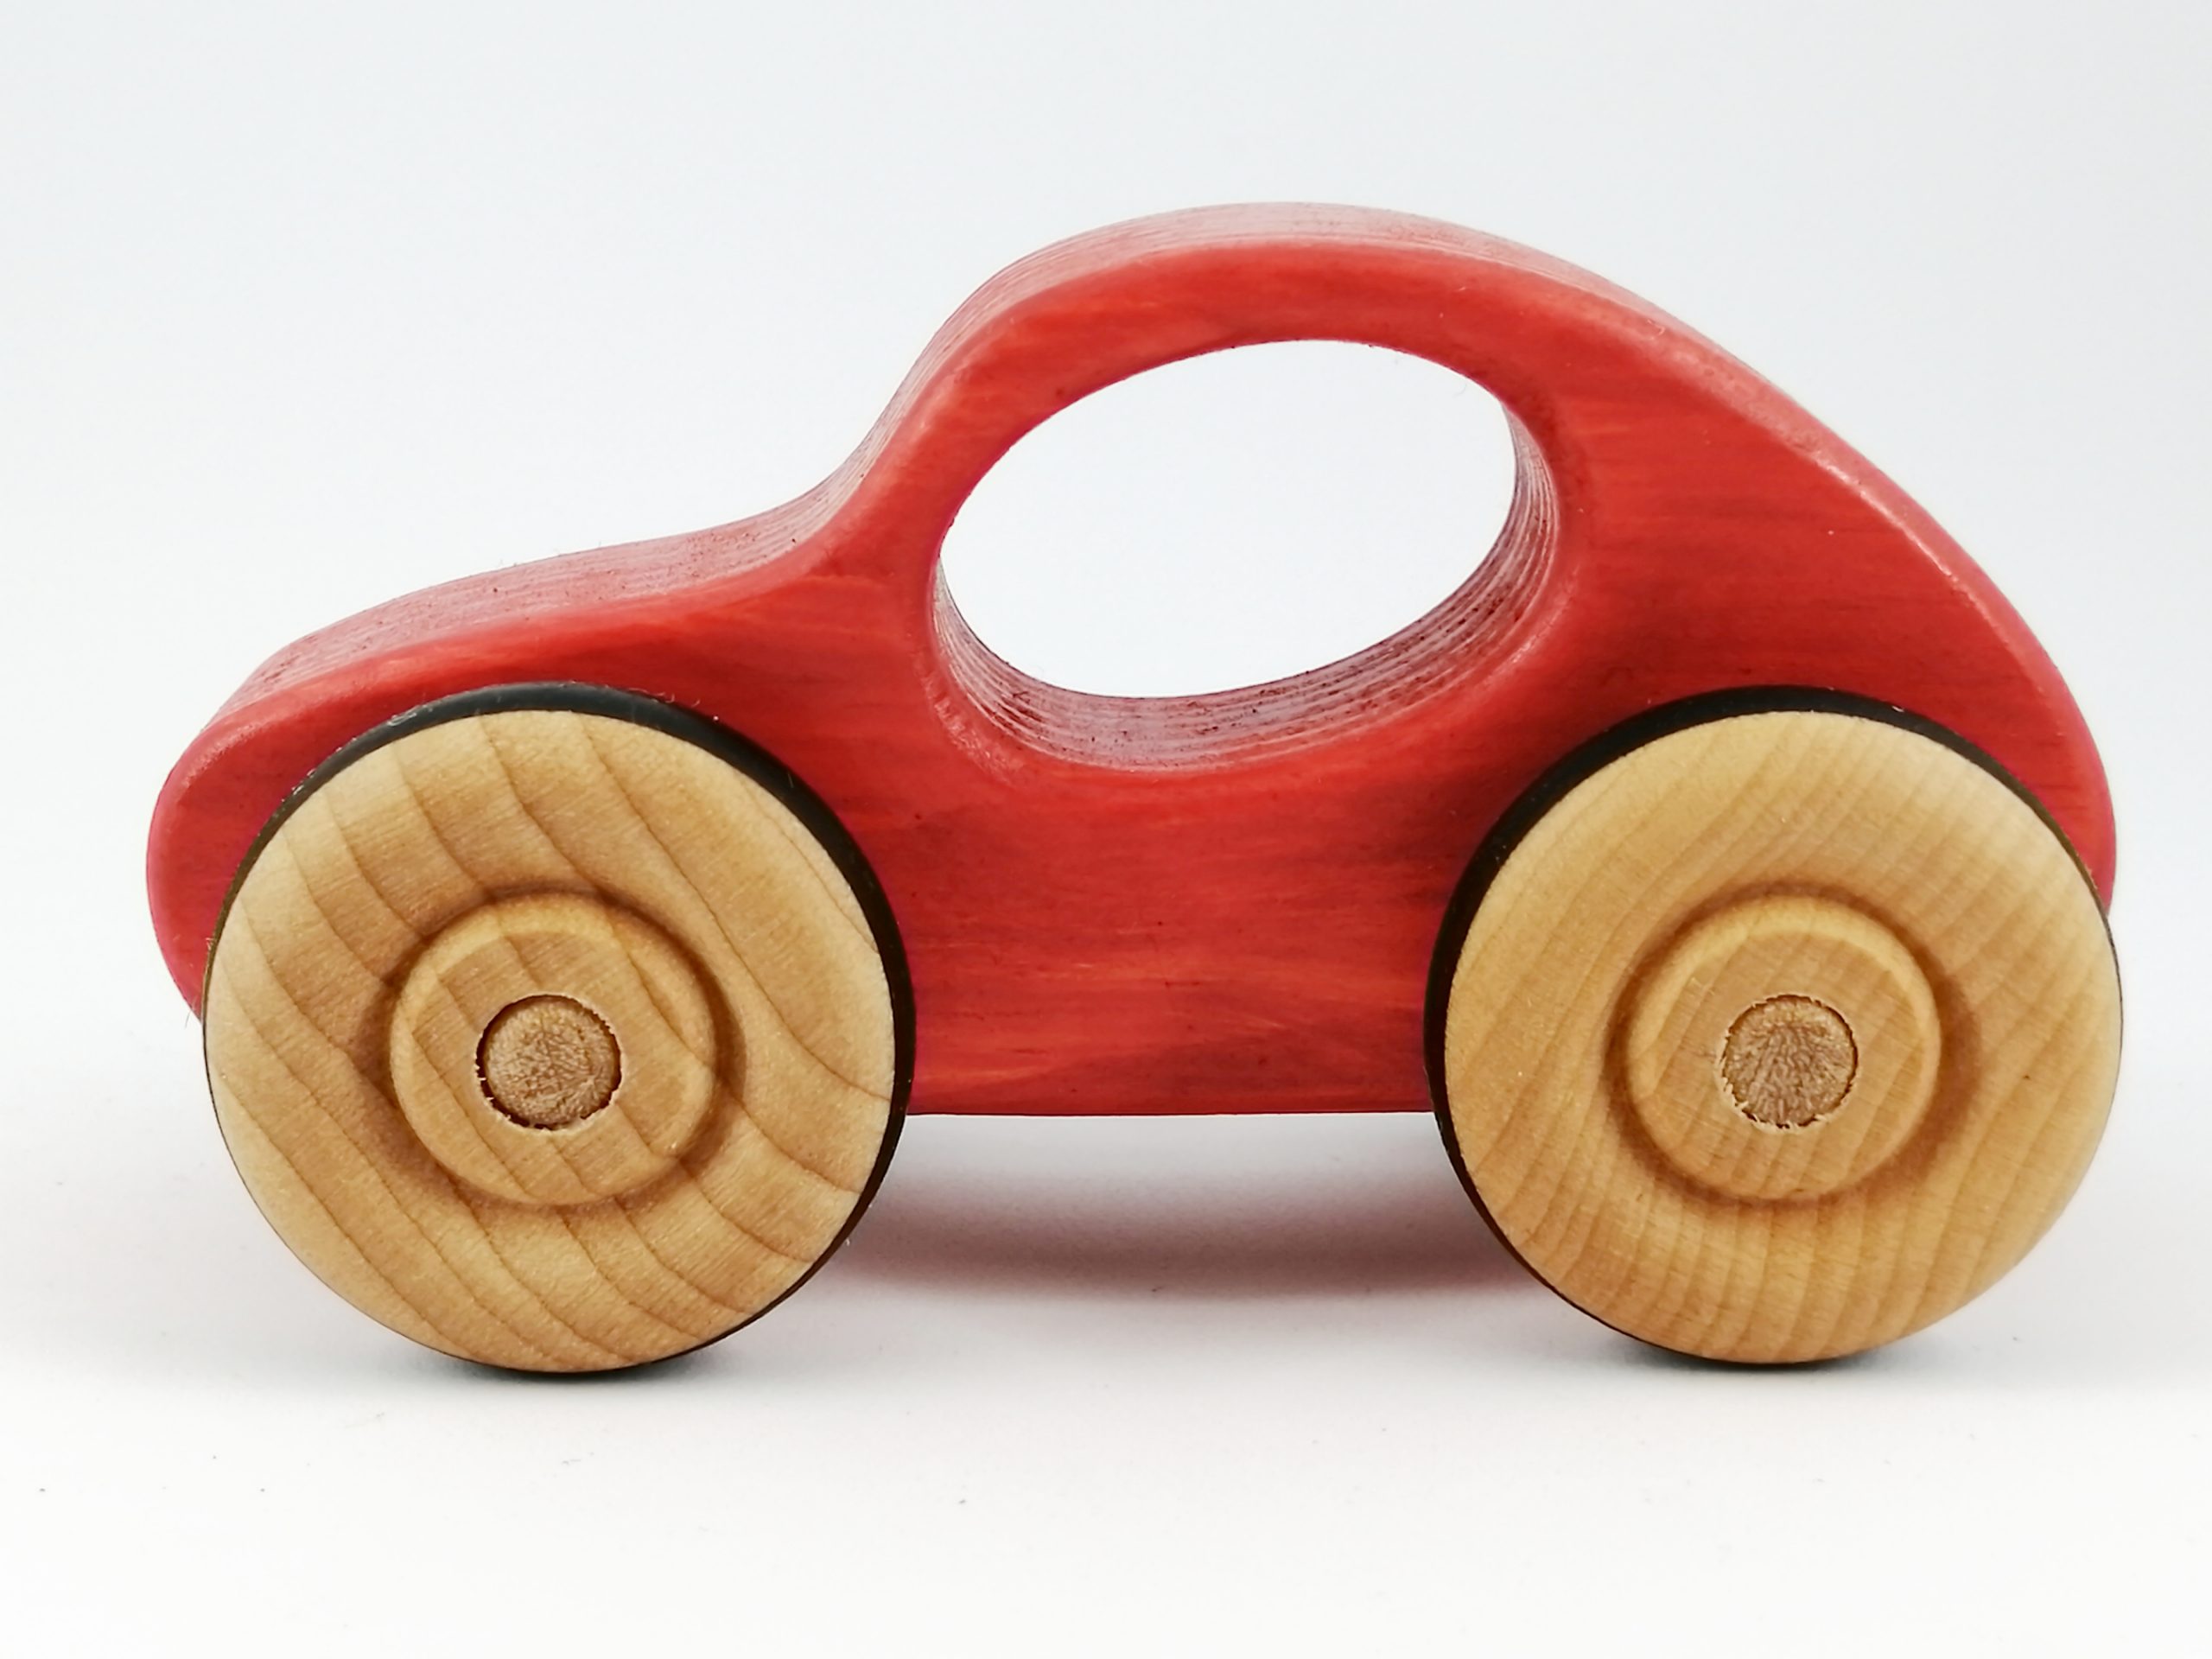 baby toy car